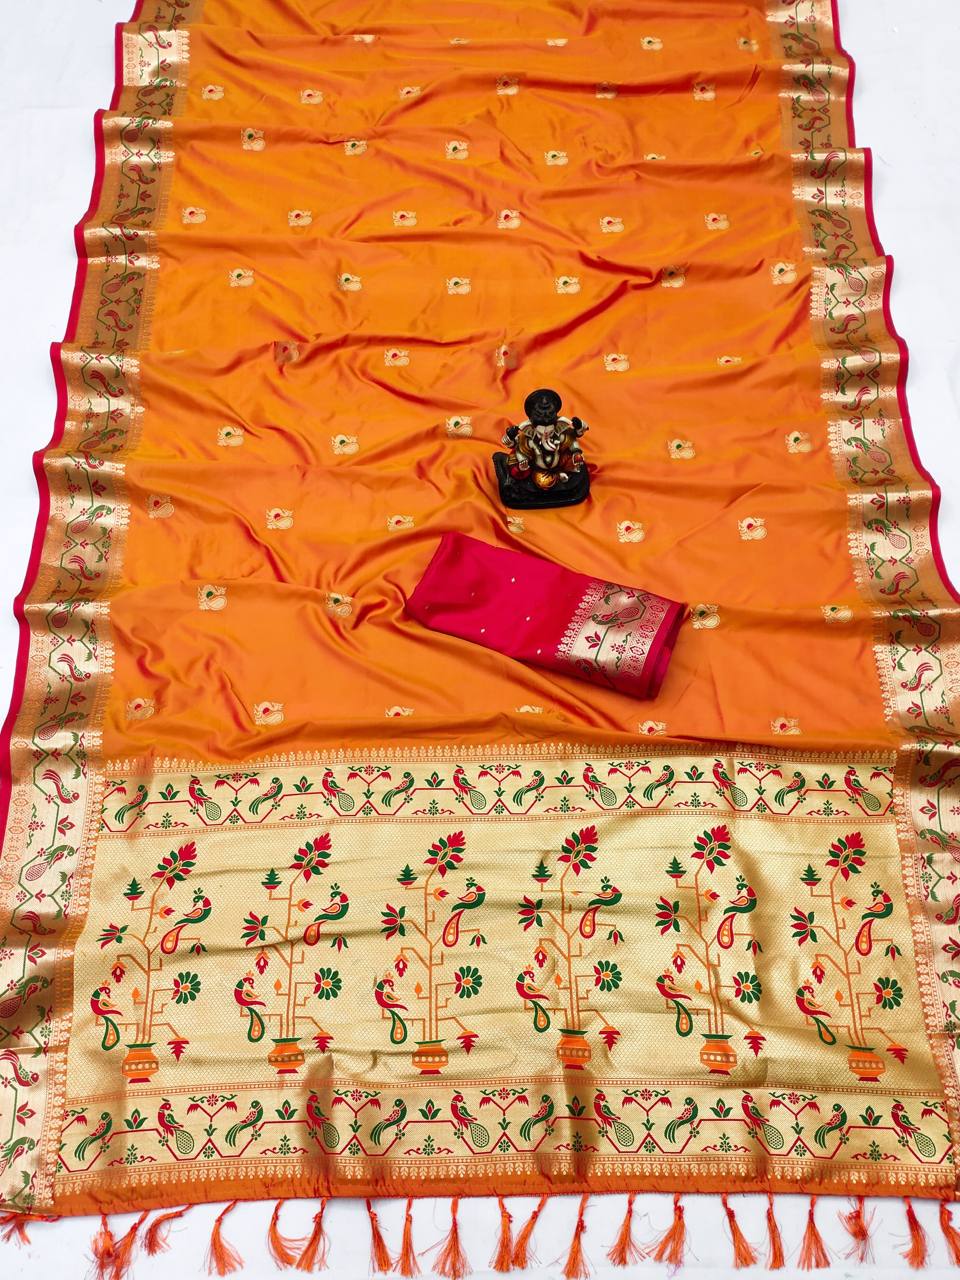 Beautiful soft Kanchi Paithani saree with Peacock butties with gold zari weaving All over the saree to give rich and unique look